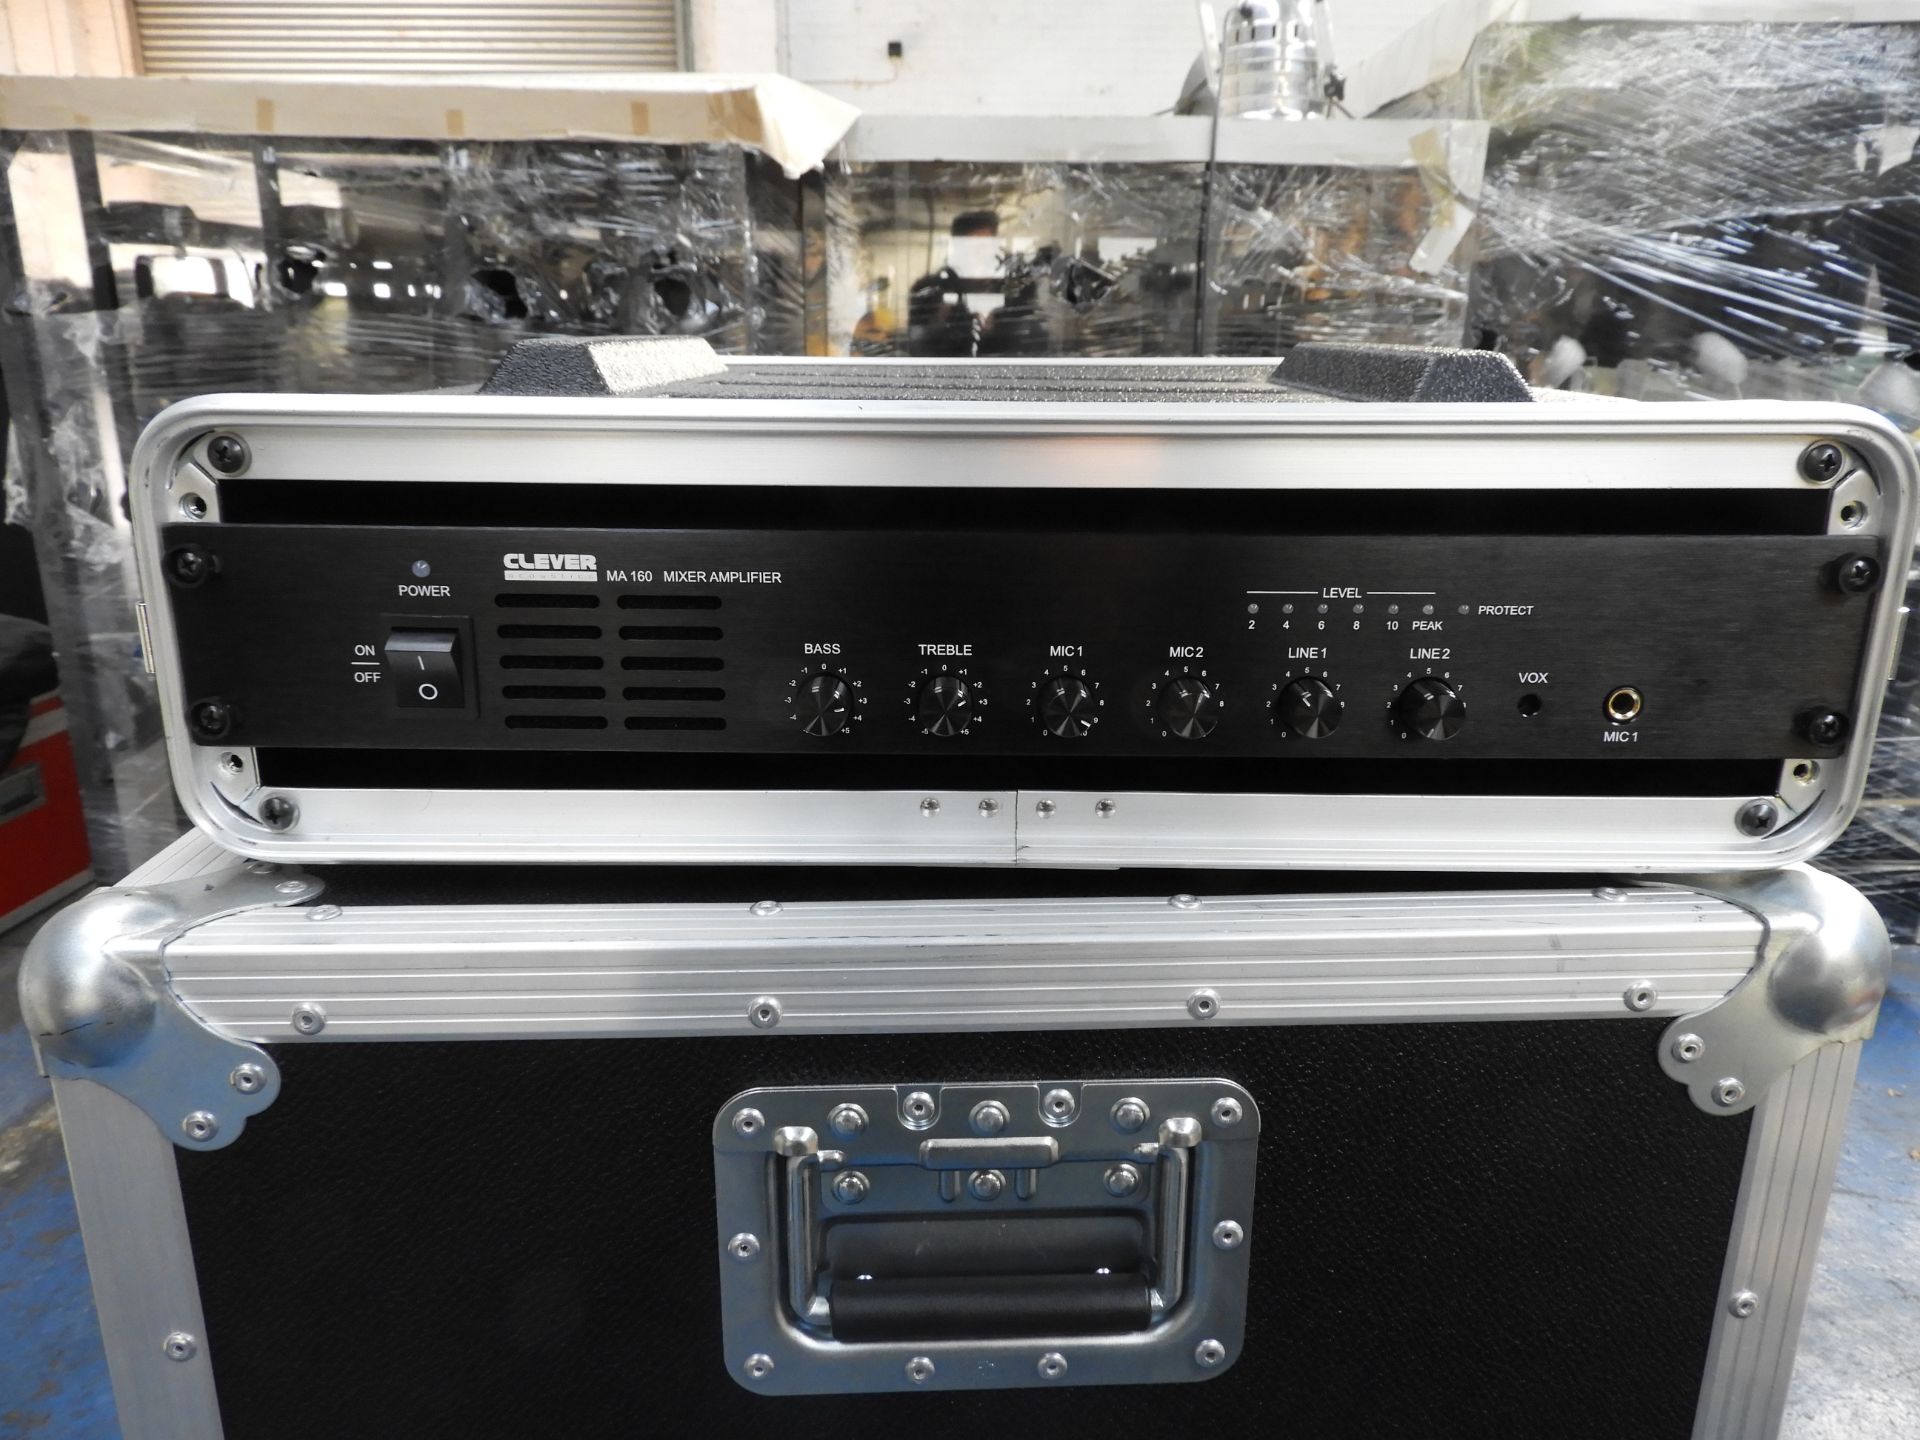 Clever acoustics MA 160 mixer amp, in gear 4 music flight case included - Image 3 of 5